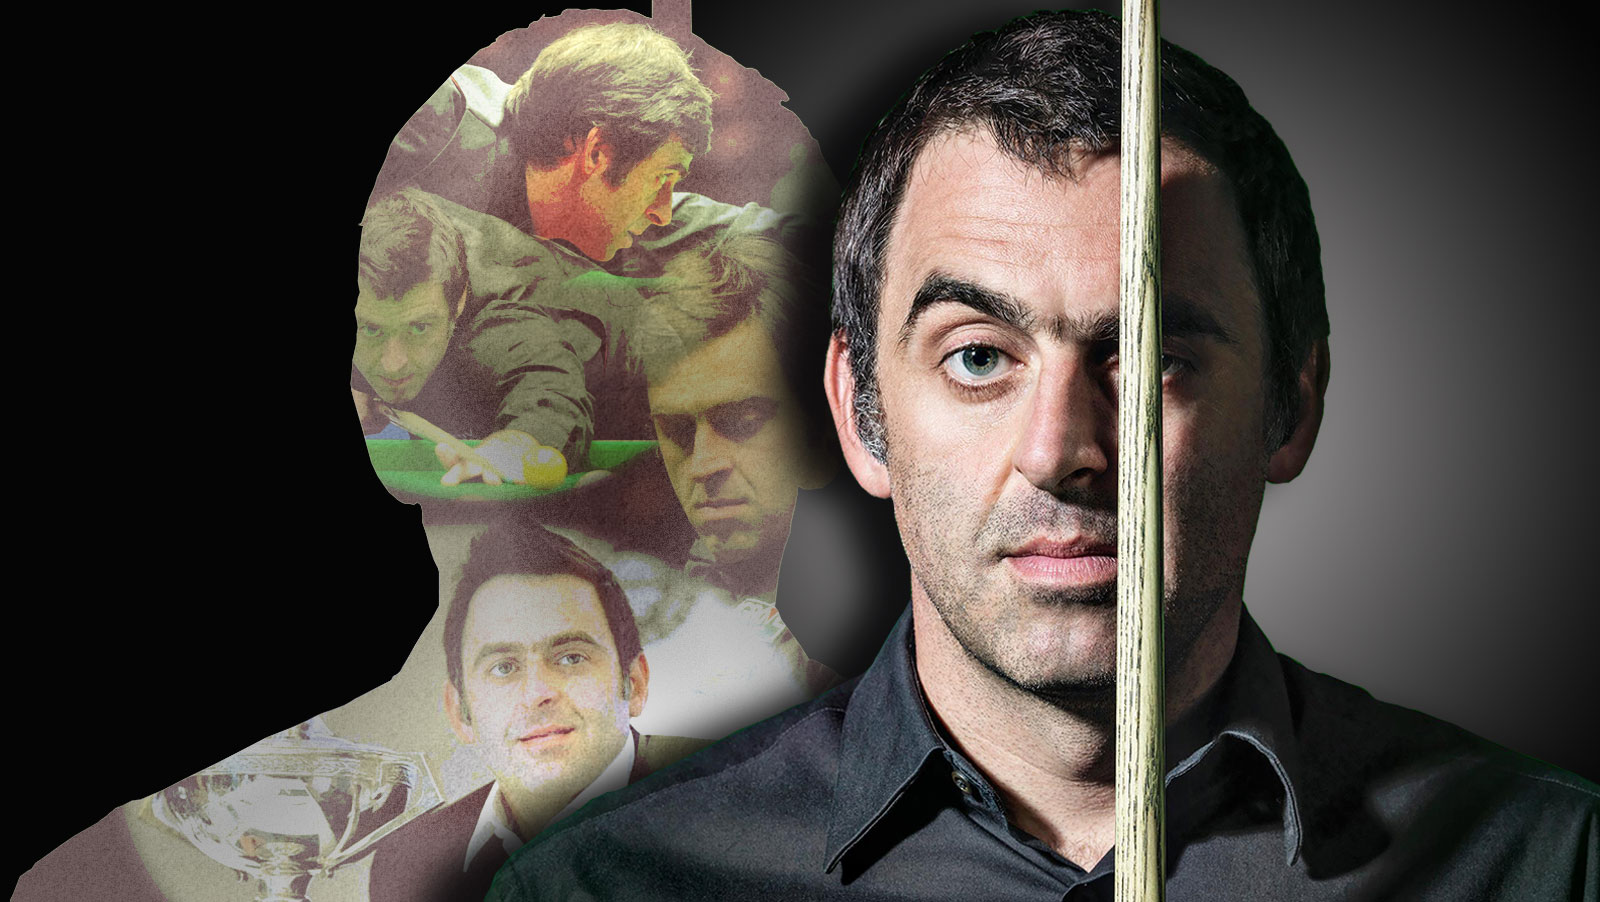 Becky’s Affiliated: Catching up with Ronnie O’Sullivan, the world’s best snooker player